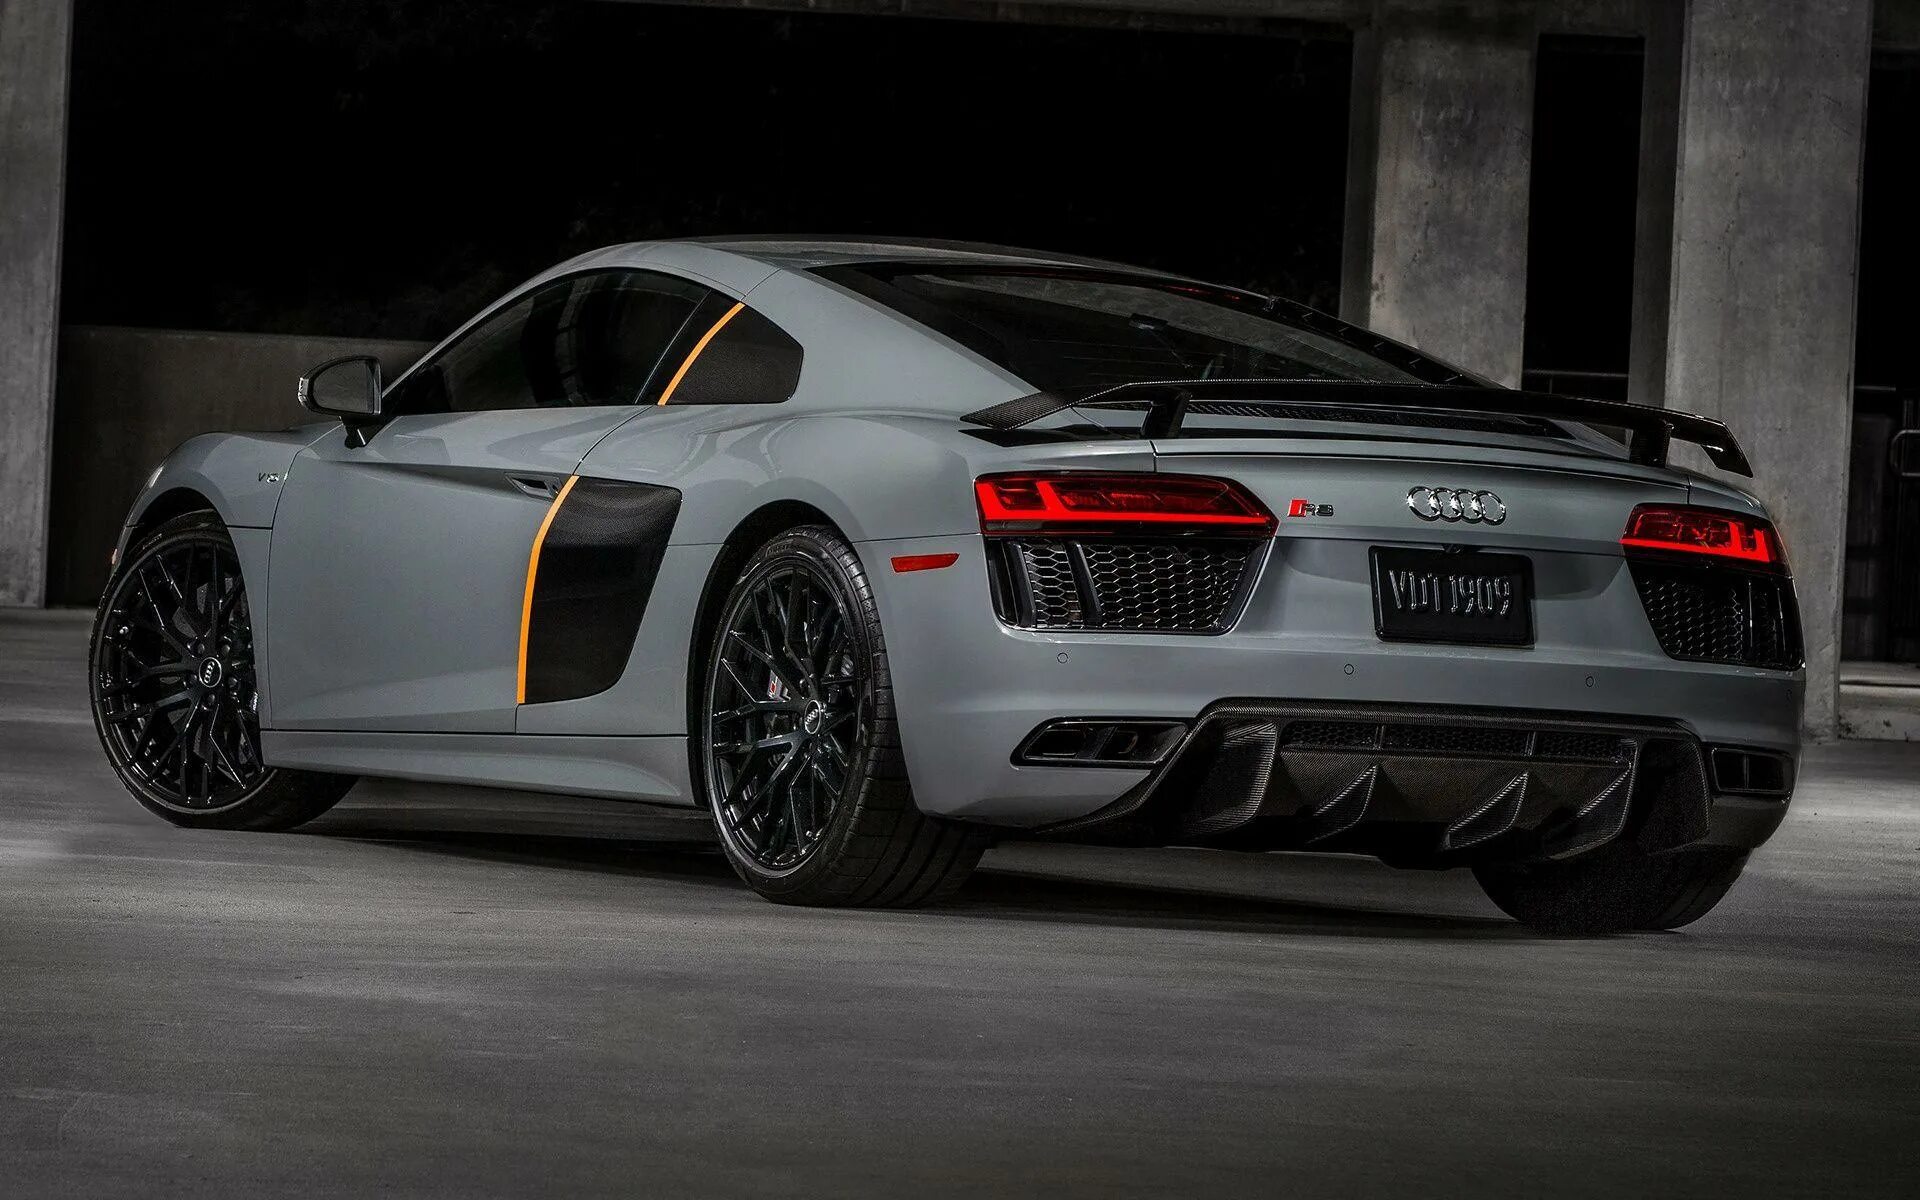 G v 10. Audi r8 v10 Plus. Audi r8 Coupe 2017. 2016 Audi r8 v10 Plus. Audi r8 Limited Edition.